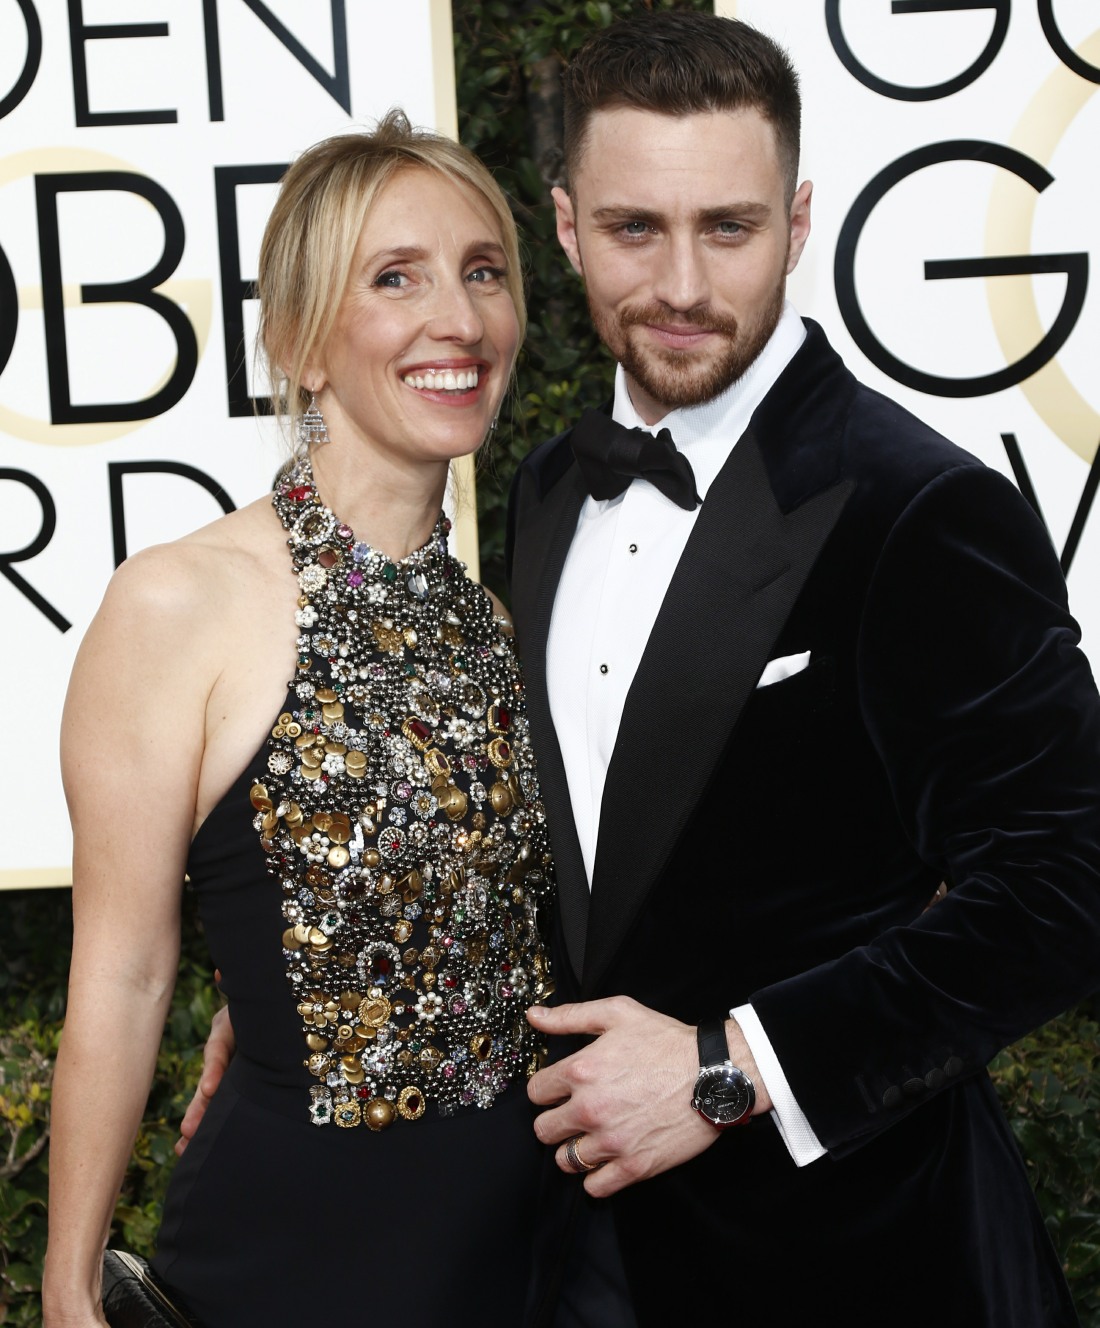 Sam Taylor-Johnson and actor Aaron Taylor-Johnson arrive at the 74th Annual Golden Globe Awards, Golden Globes, in Beverly Hills, Los Angeles, USA, on 08 January 2017. Photo: Hubert Boesl  - NO WIRE SERVICE - Photo: Hubert Boesl/